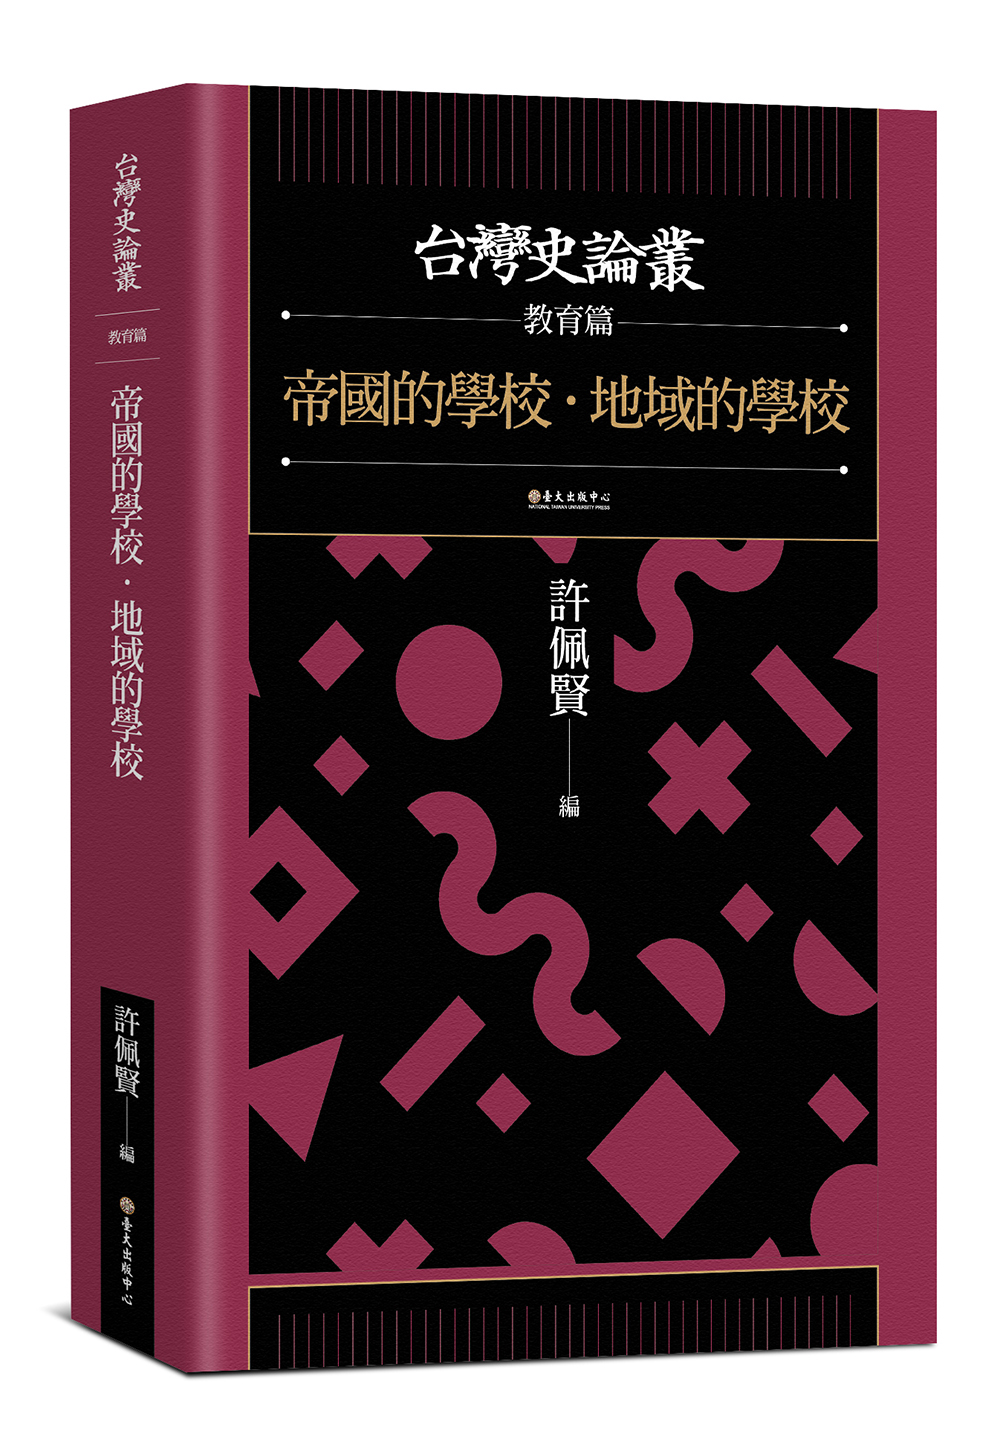 The History of Modern Education in Taiwan under Japanese Colonial Rule